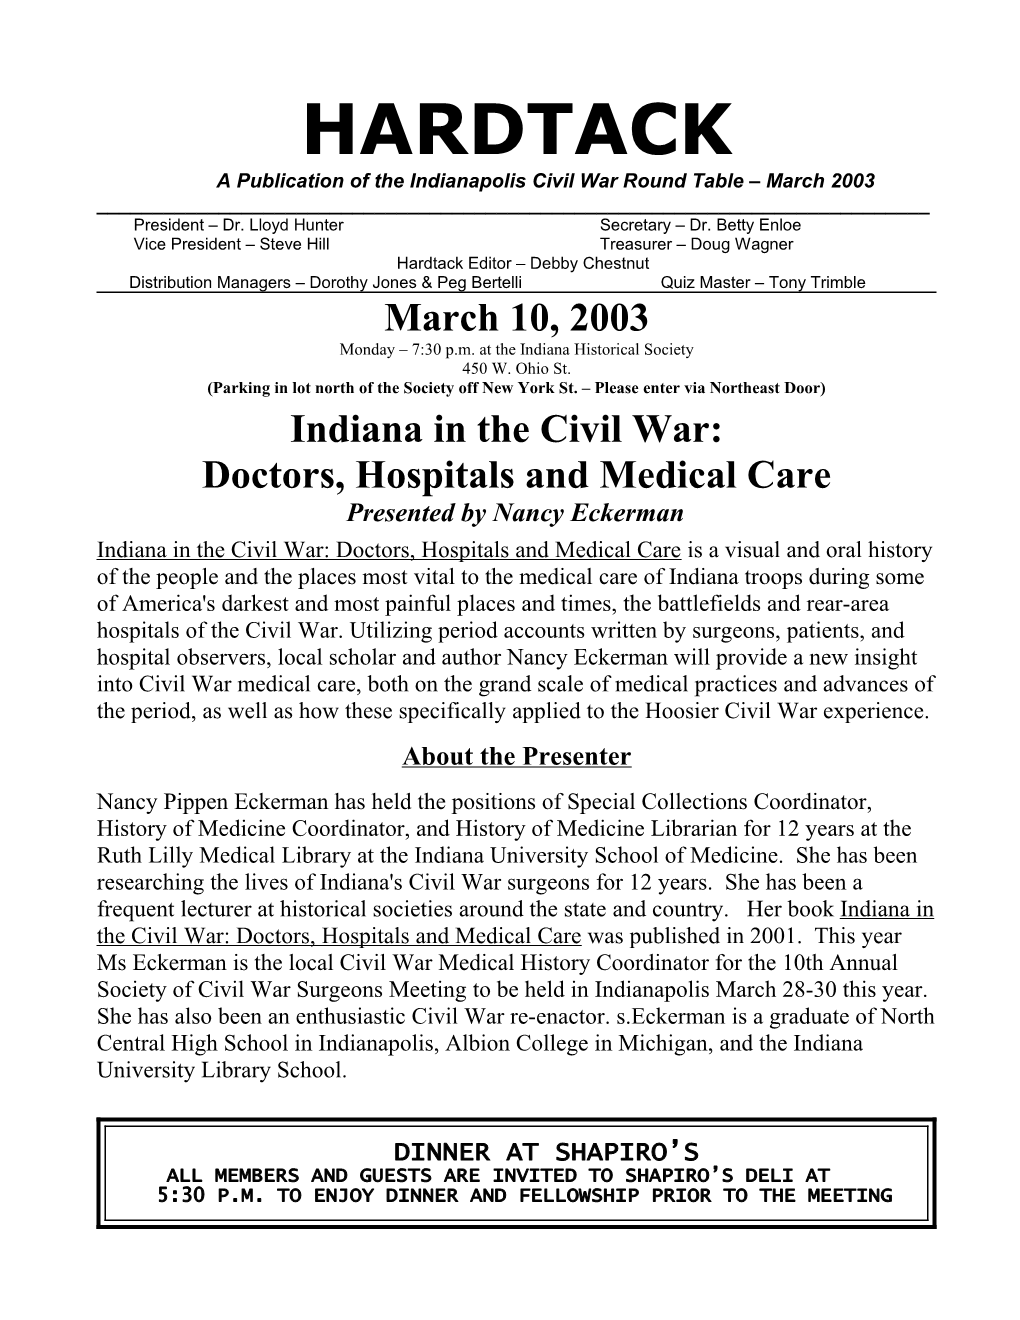 A Publication of the Indianapolis Civil War Round Table March 2003